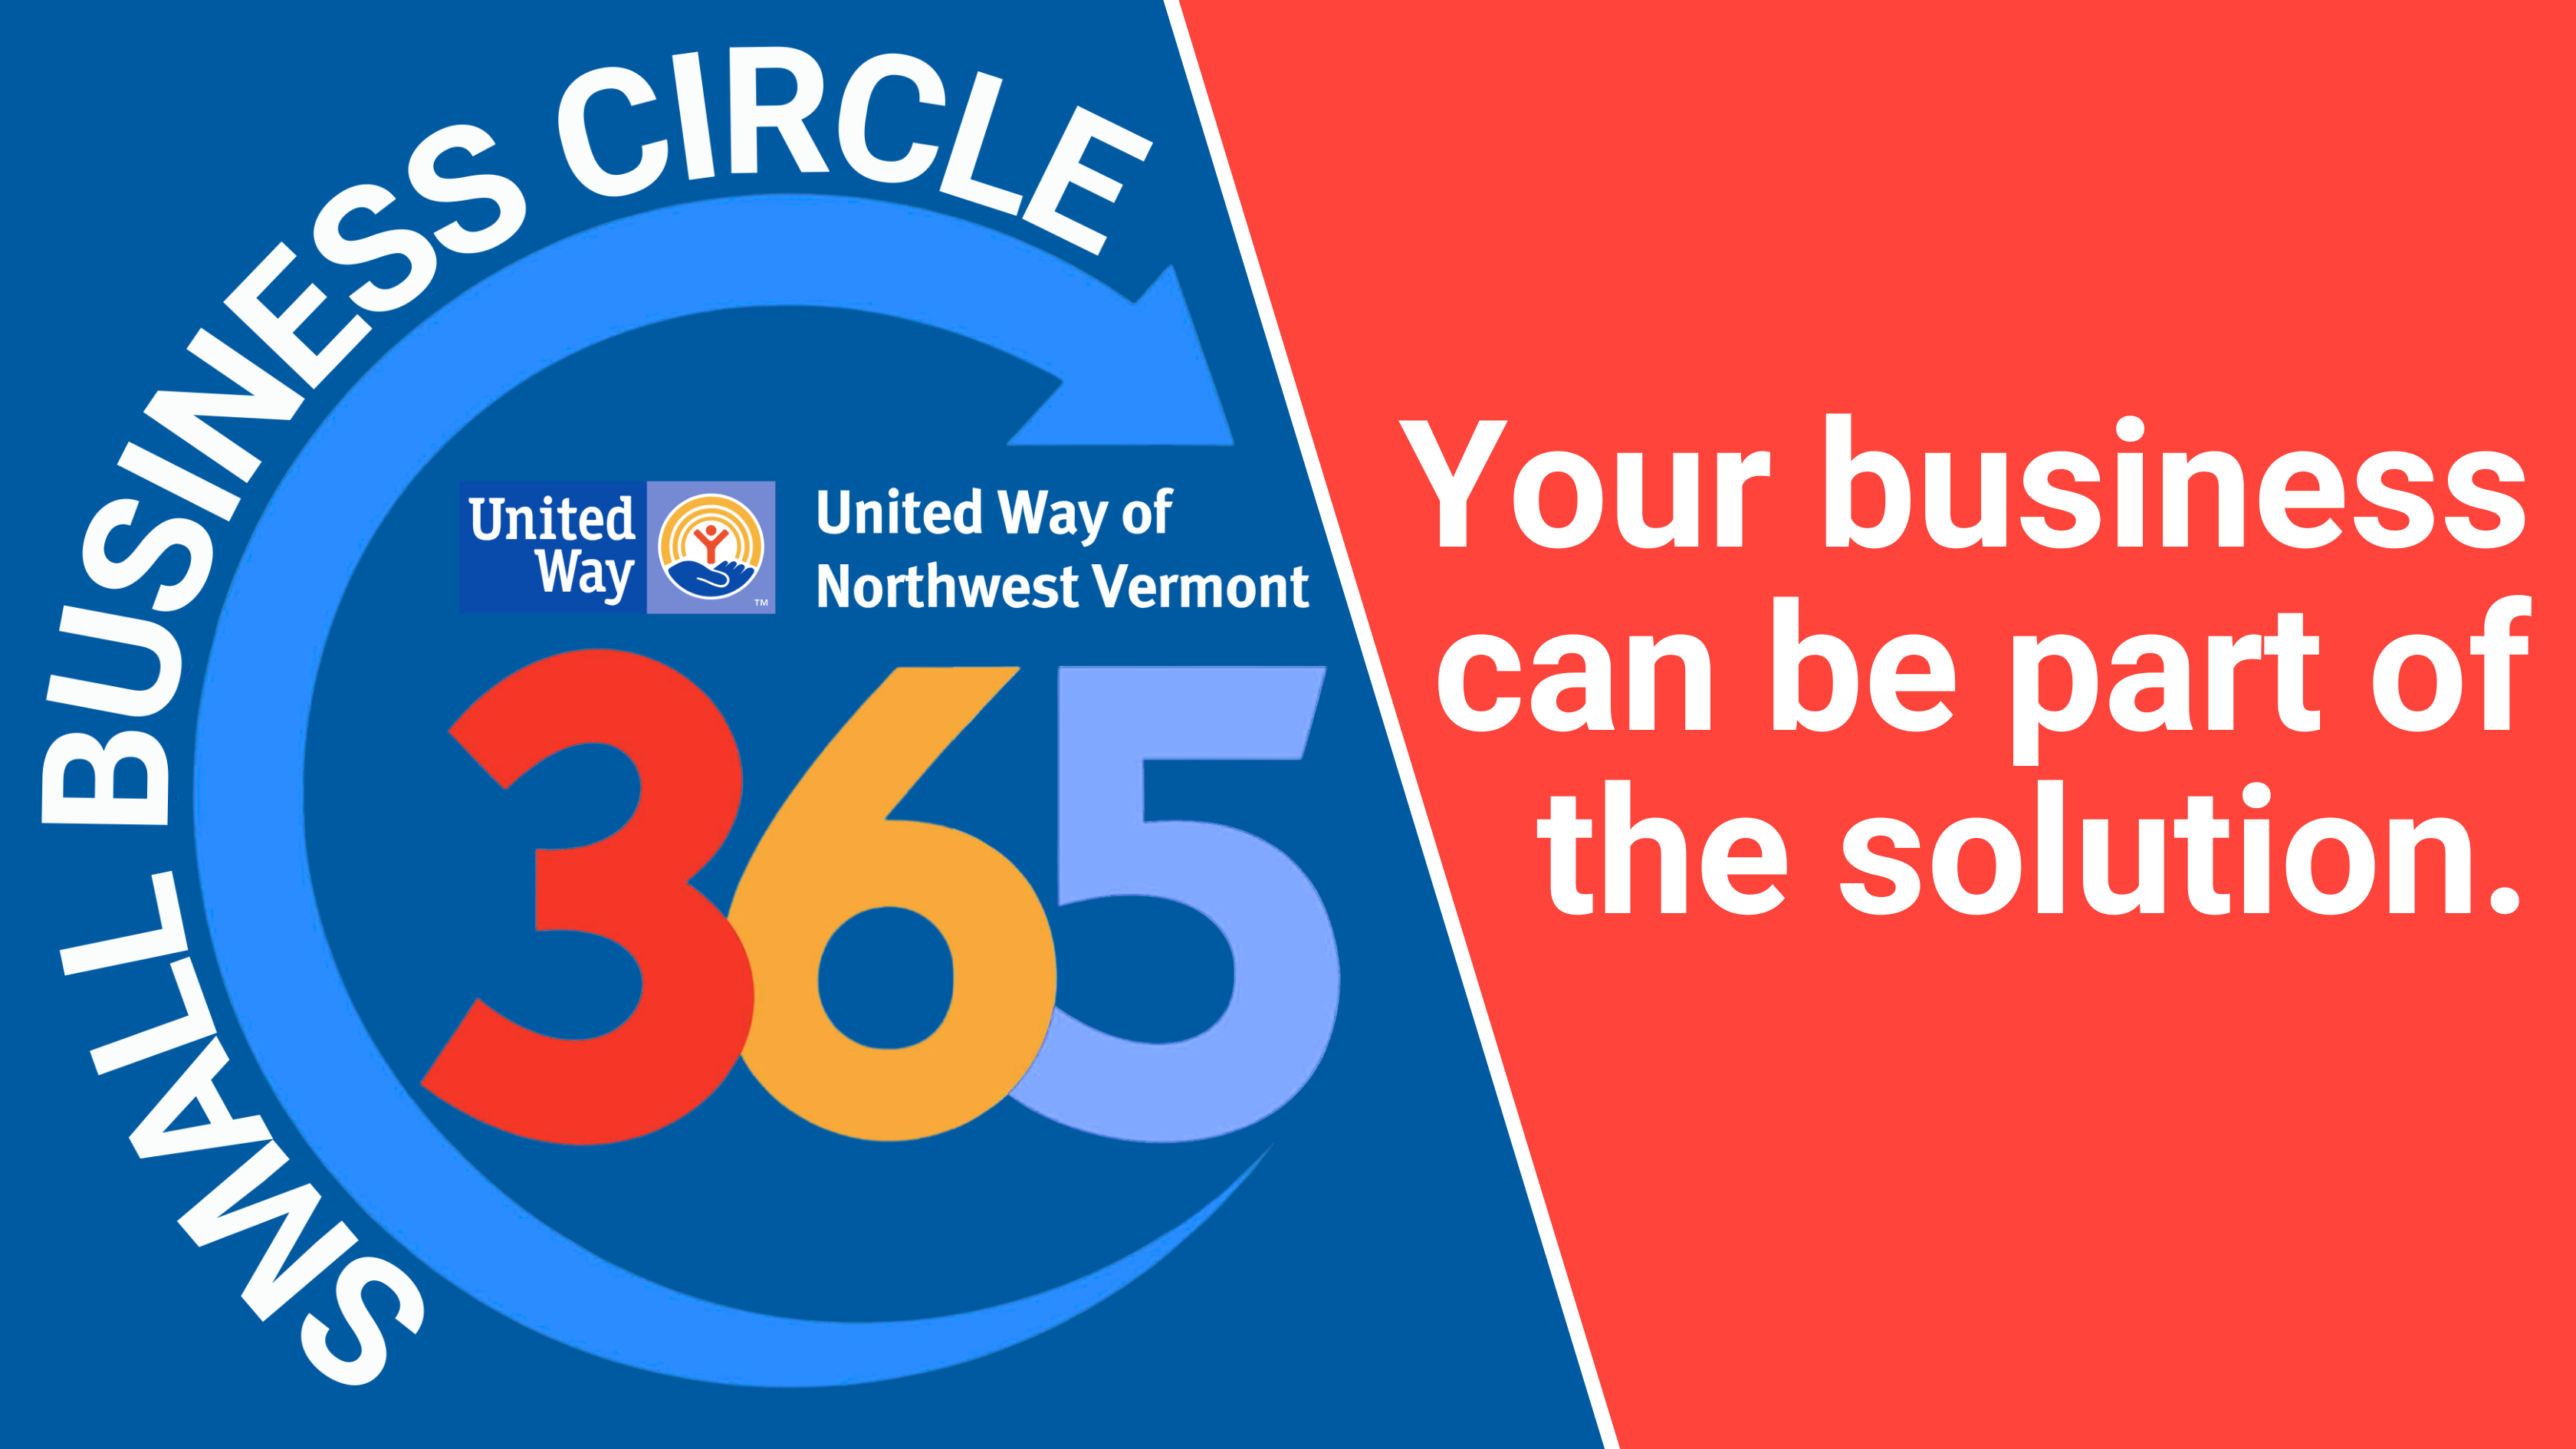 365 Small Business Circle logo with text: Your business can be part of the solution.